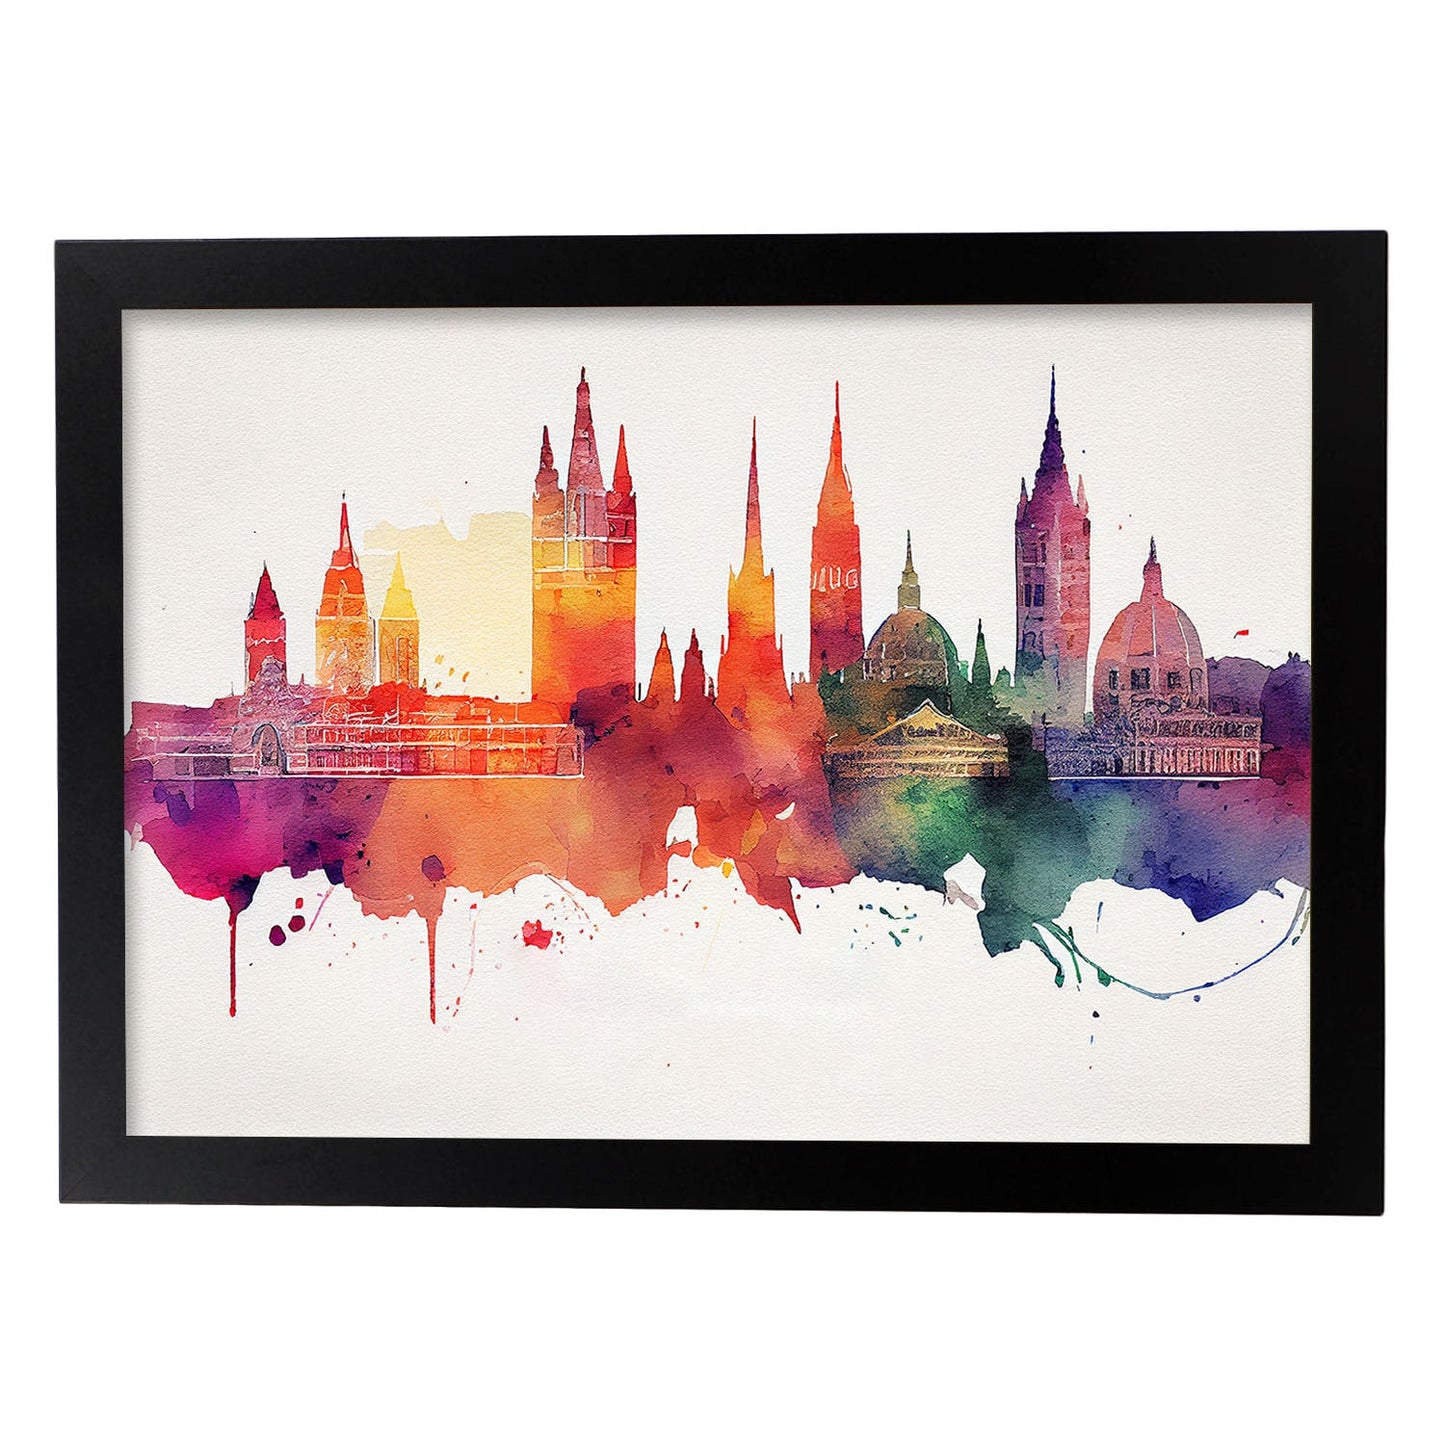 Nacnic watercolor of a skyline of the city of Vienna_3. Aesthetic Wall Art Prints for Bedroom or Living Room Design.